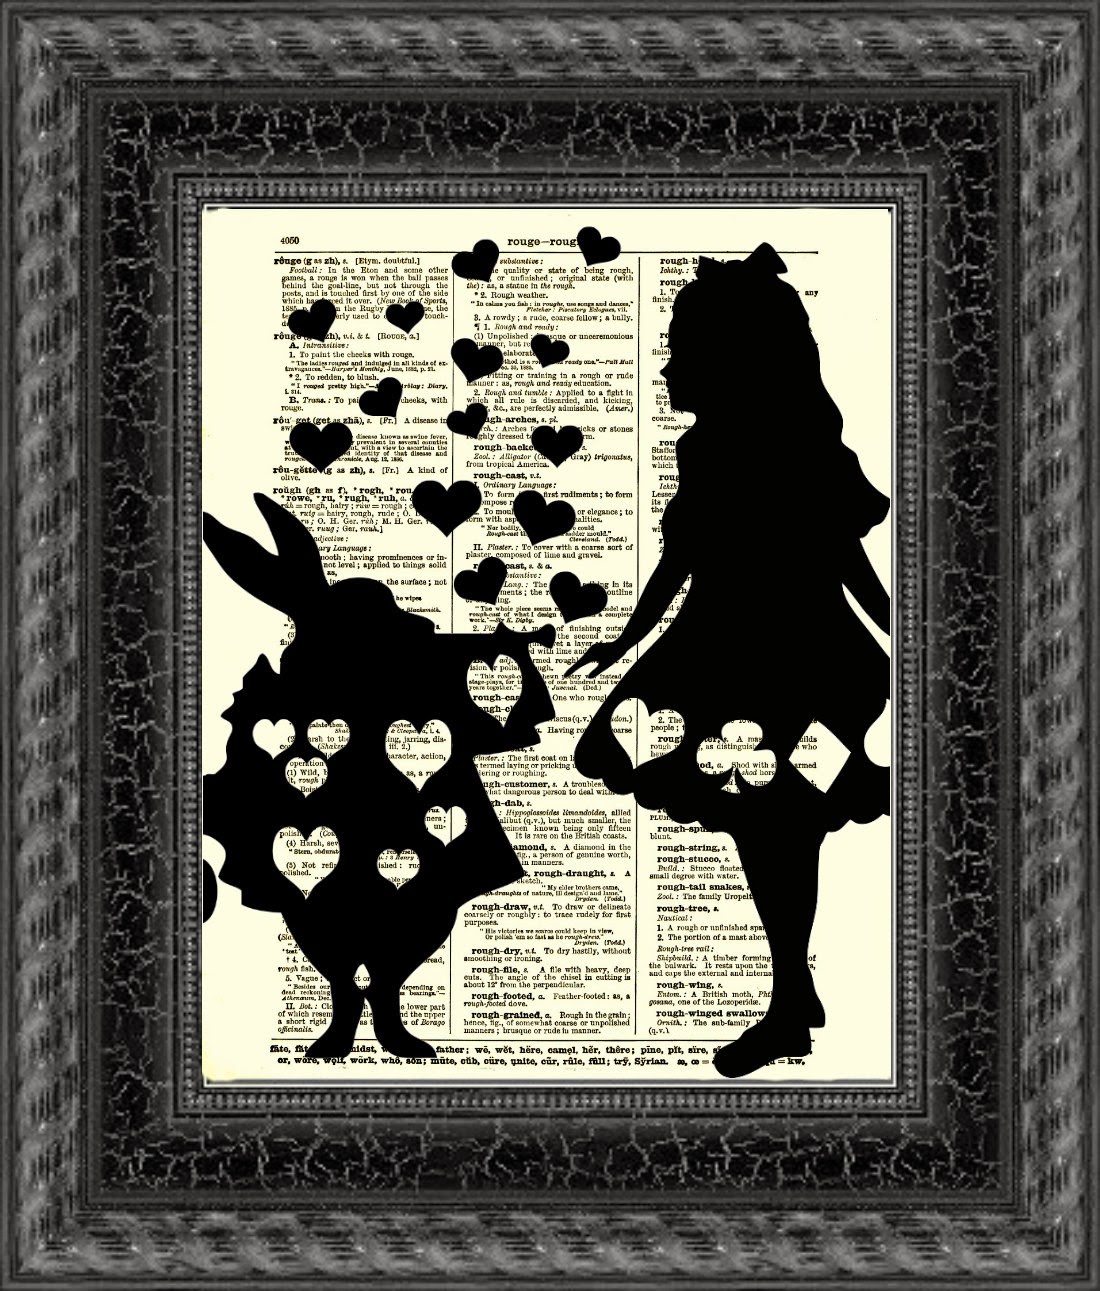 01-Alice-in-Wonderland-Belle-Old-Books-and-Dictionaries-in-Re-Imagination-Prints-www-designstack-co